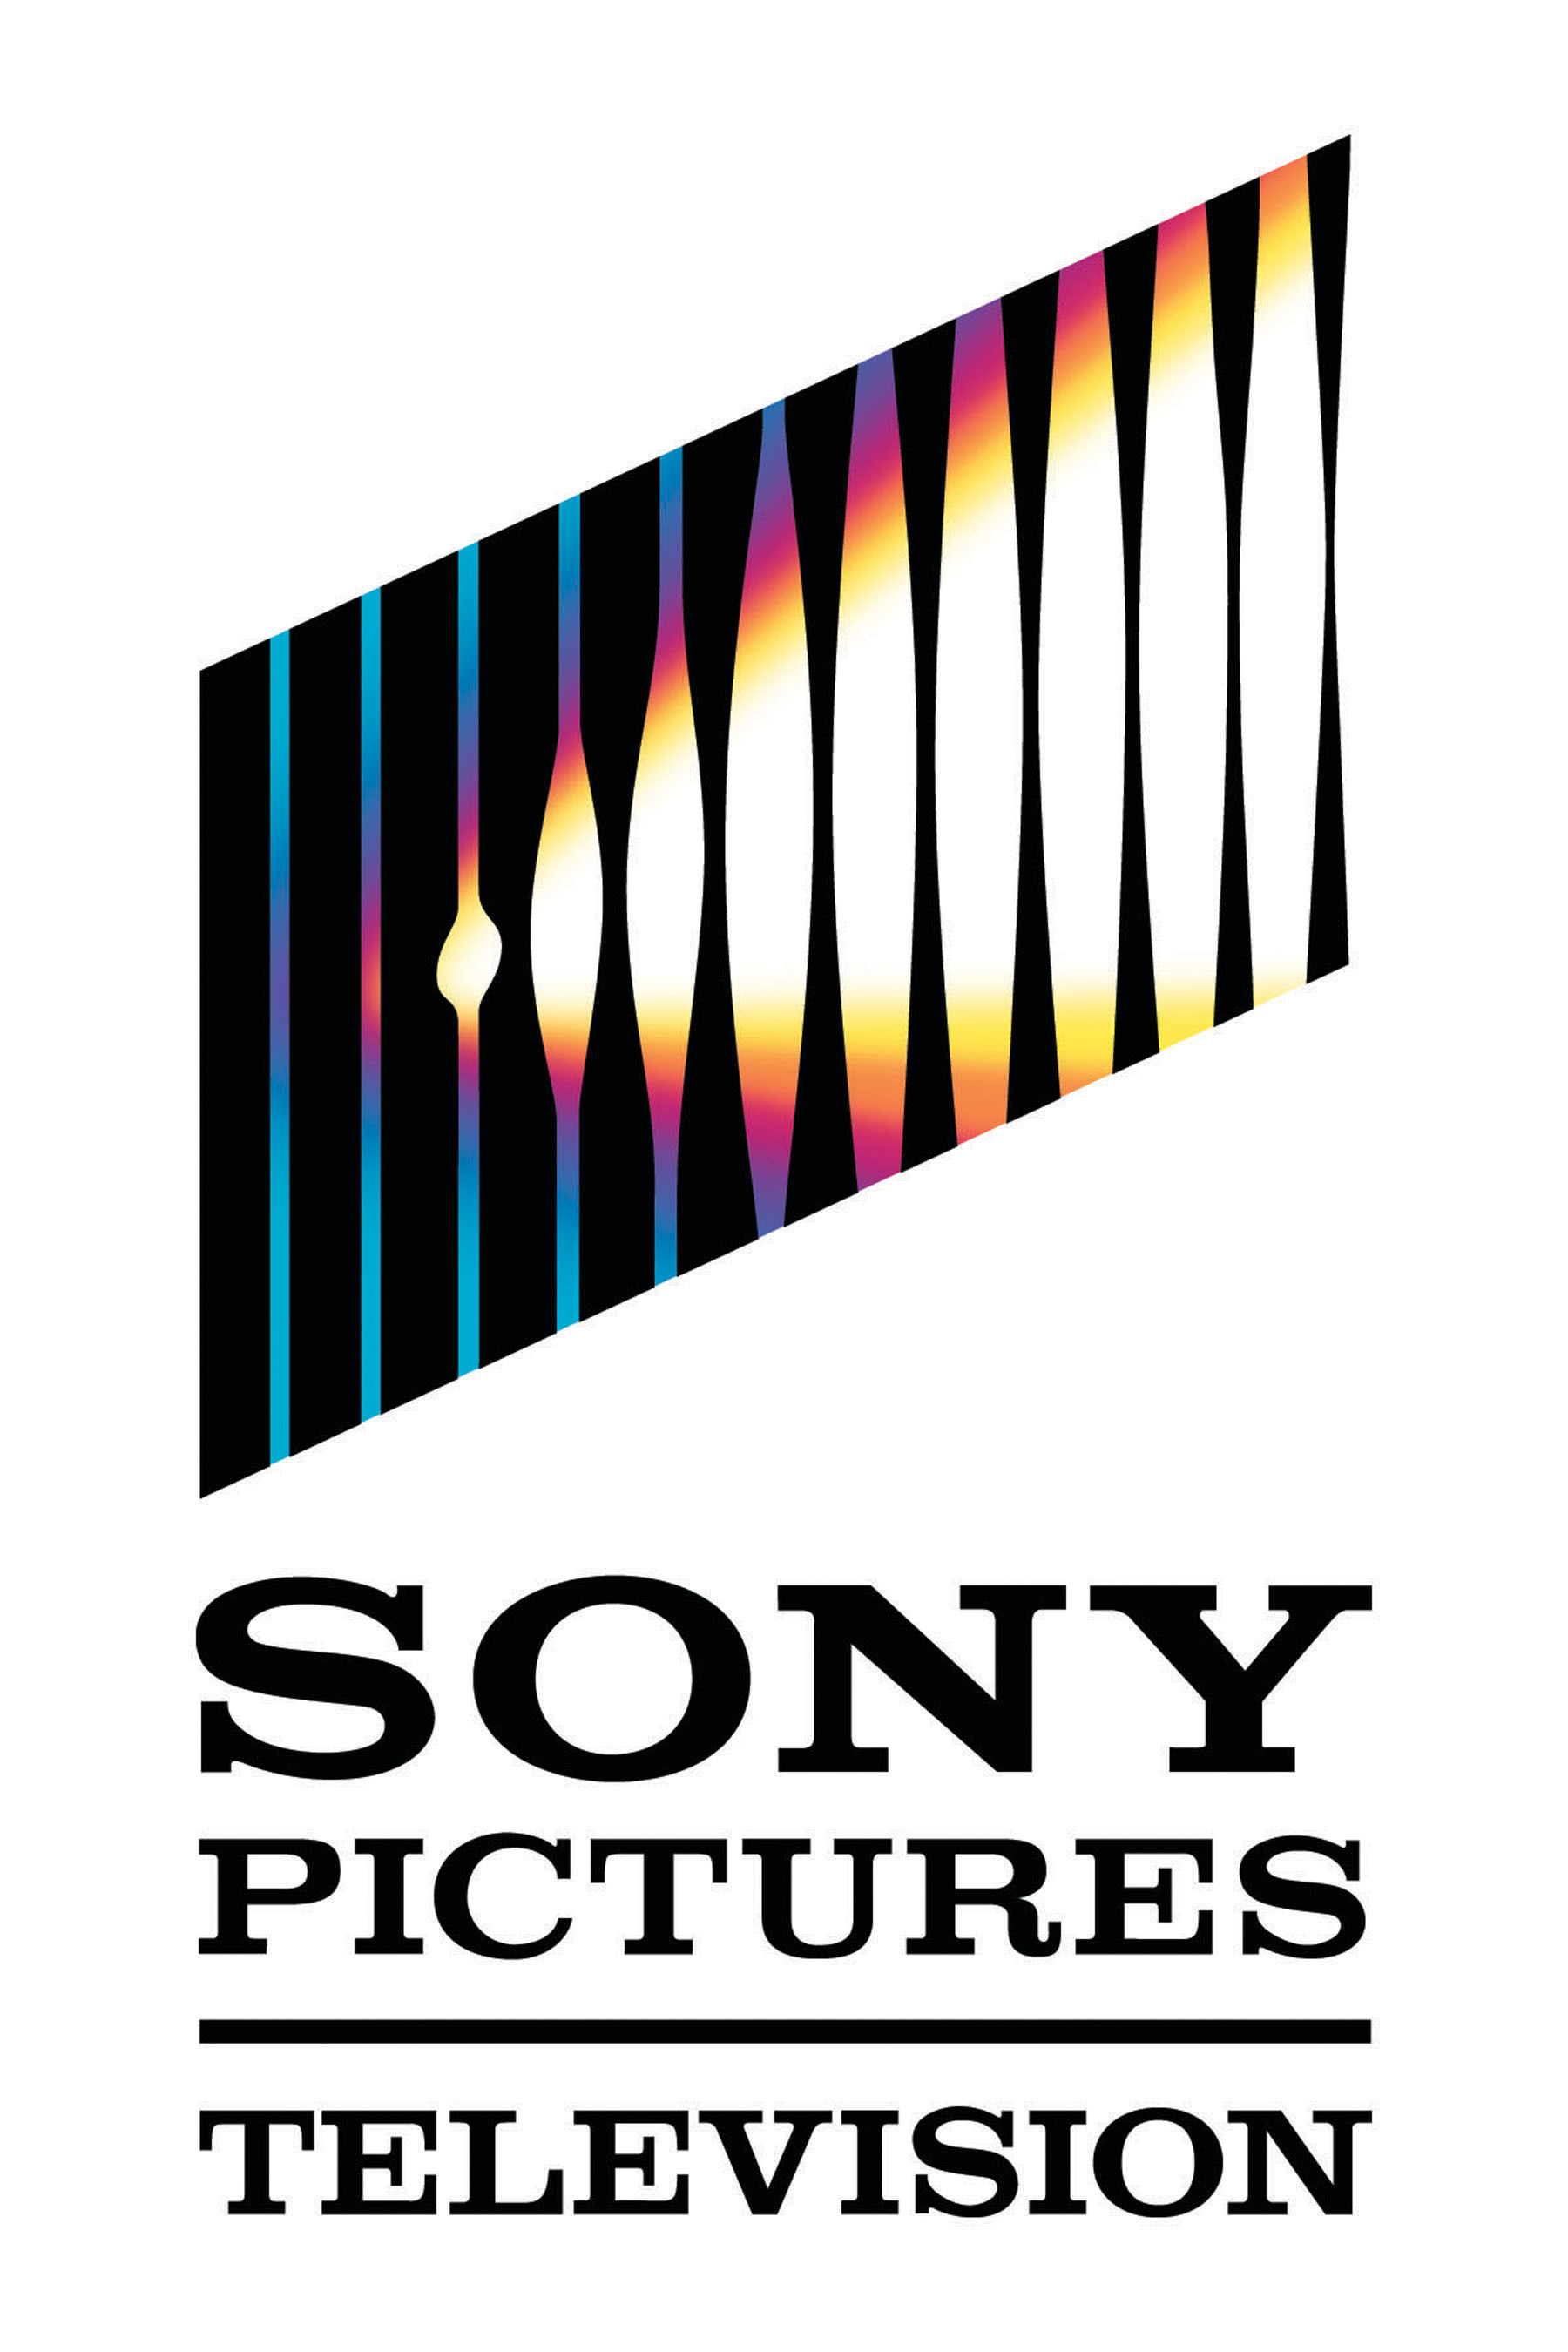 Sony Pictures Television logo.